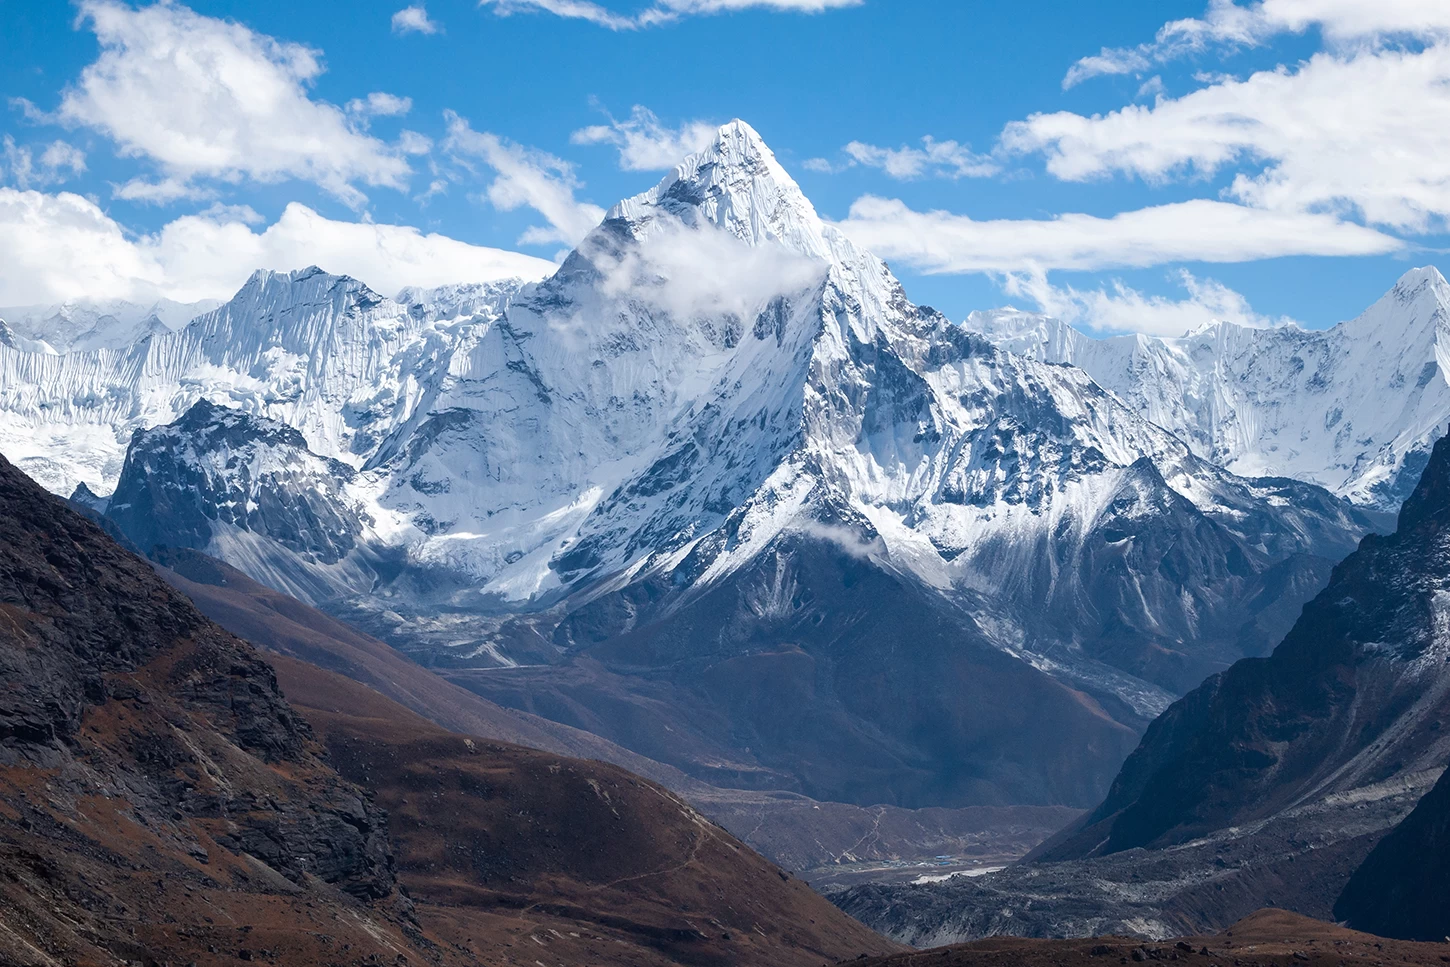  Ama Dablam Mountain View from Everest Trail. 